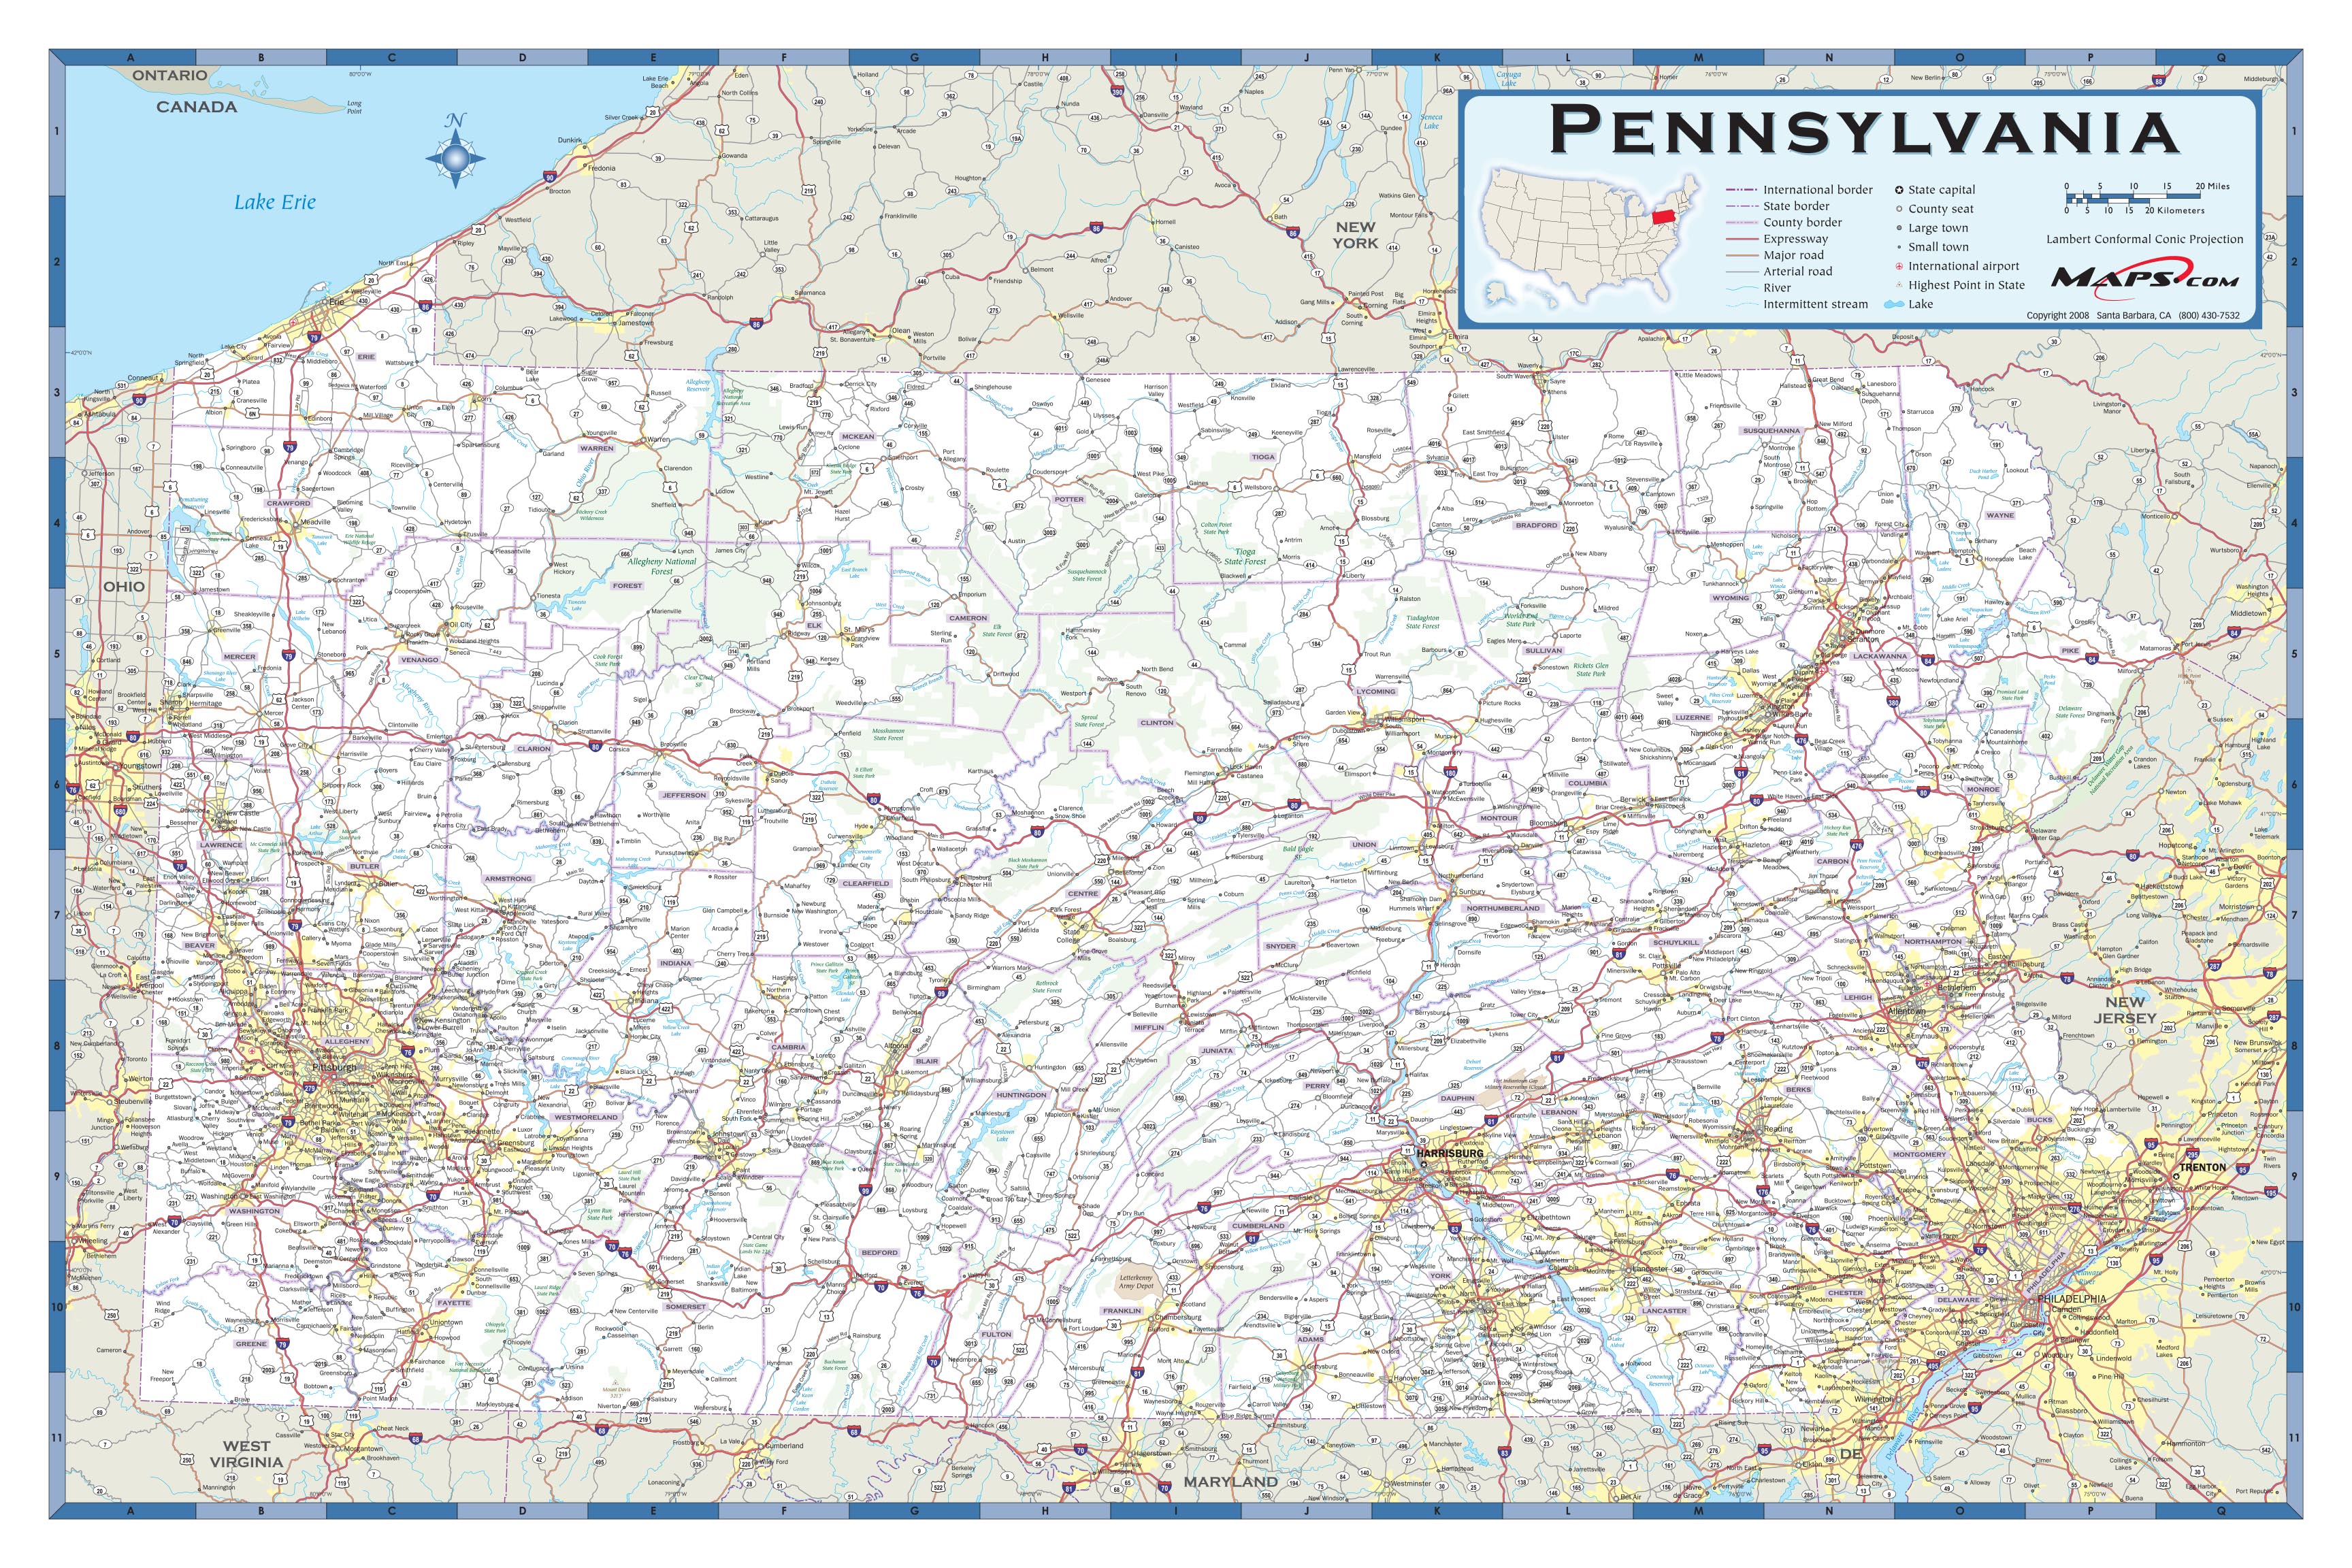 Pennsylvania County Highway Wall Map by Maps.com - MapSales